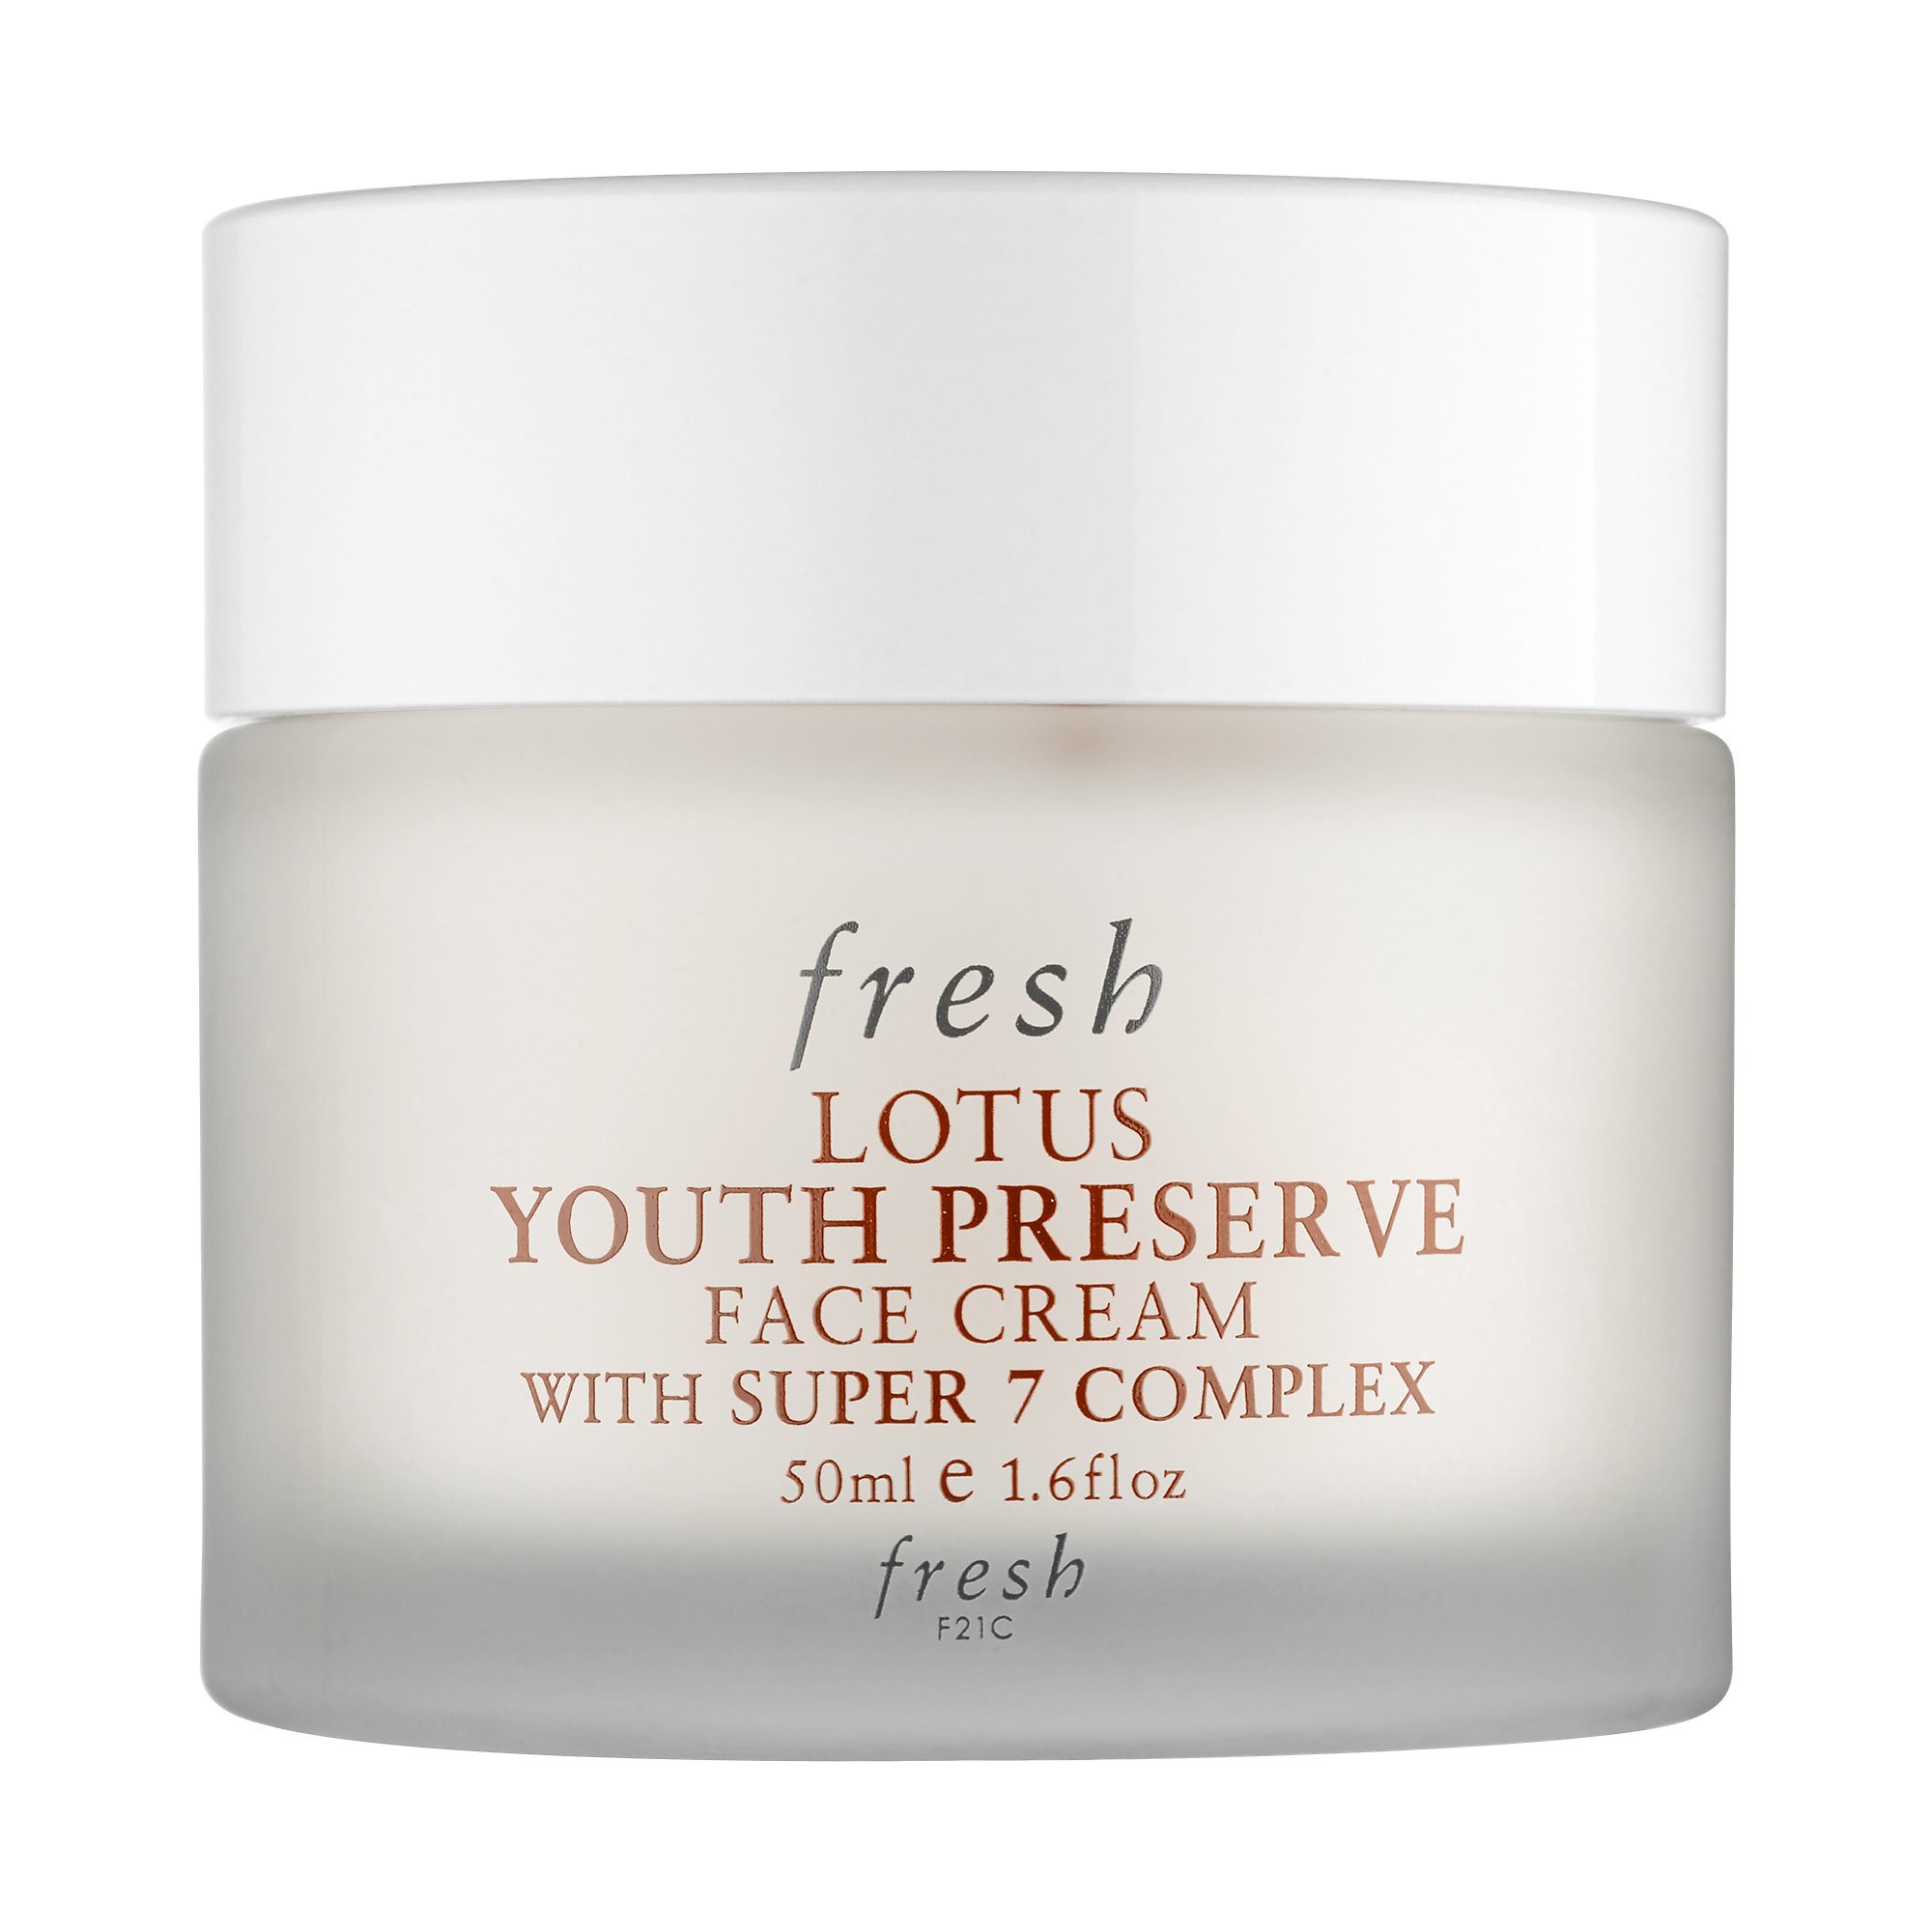 Skin Rescue Daily Face Cream - First Aid Beauty | Sephora